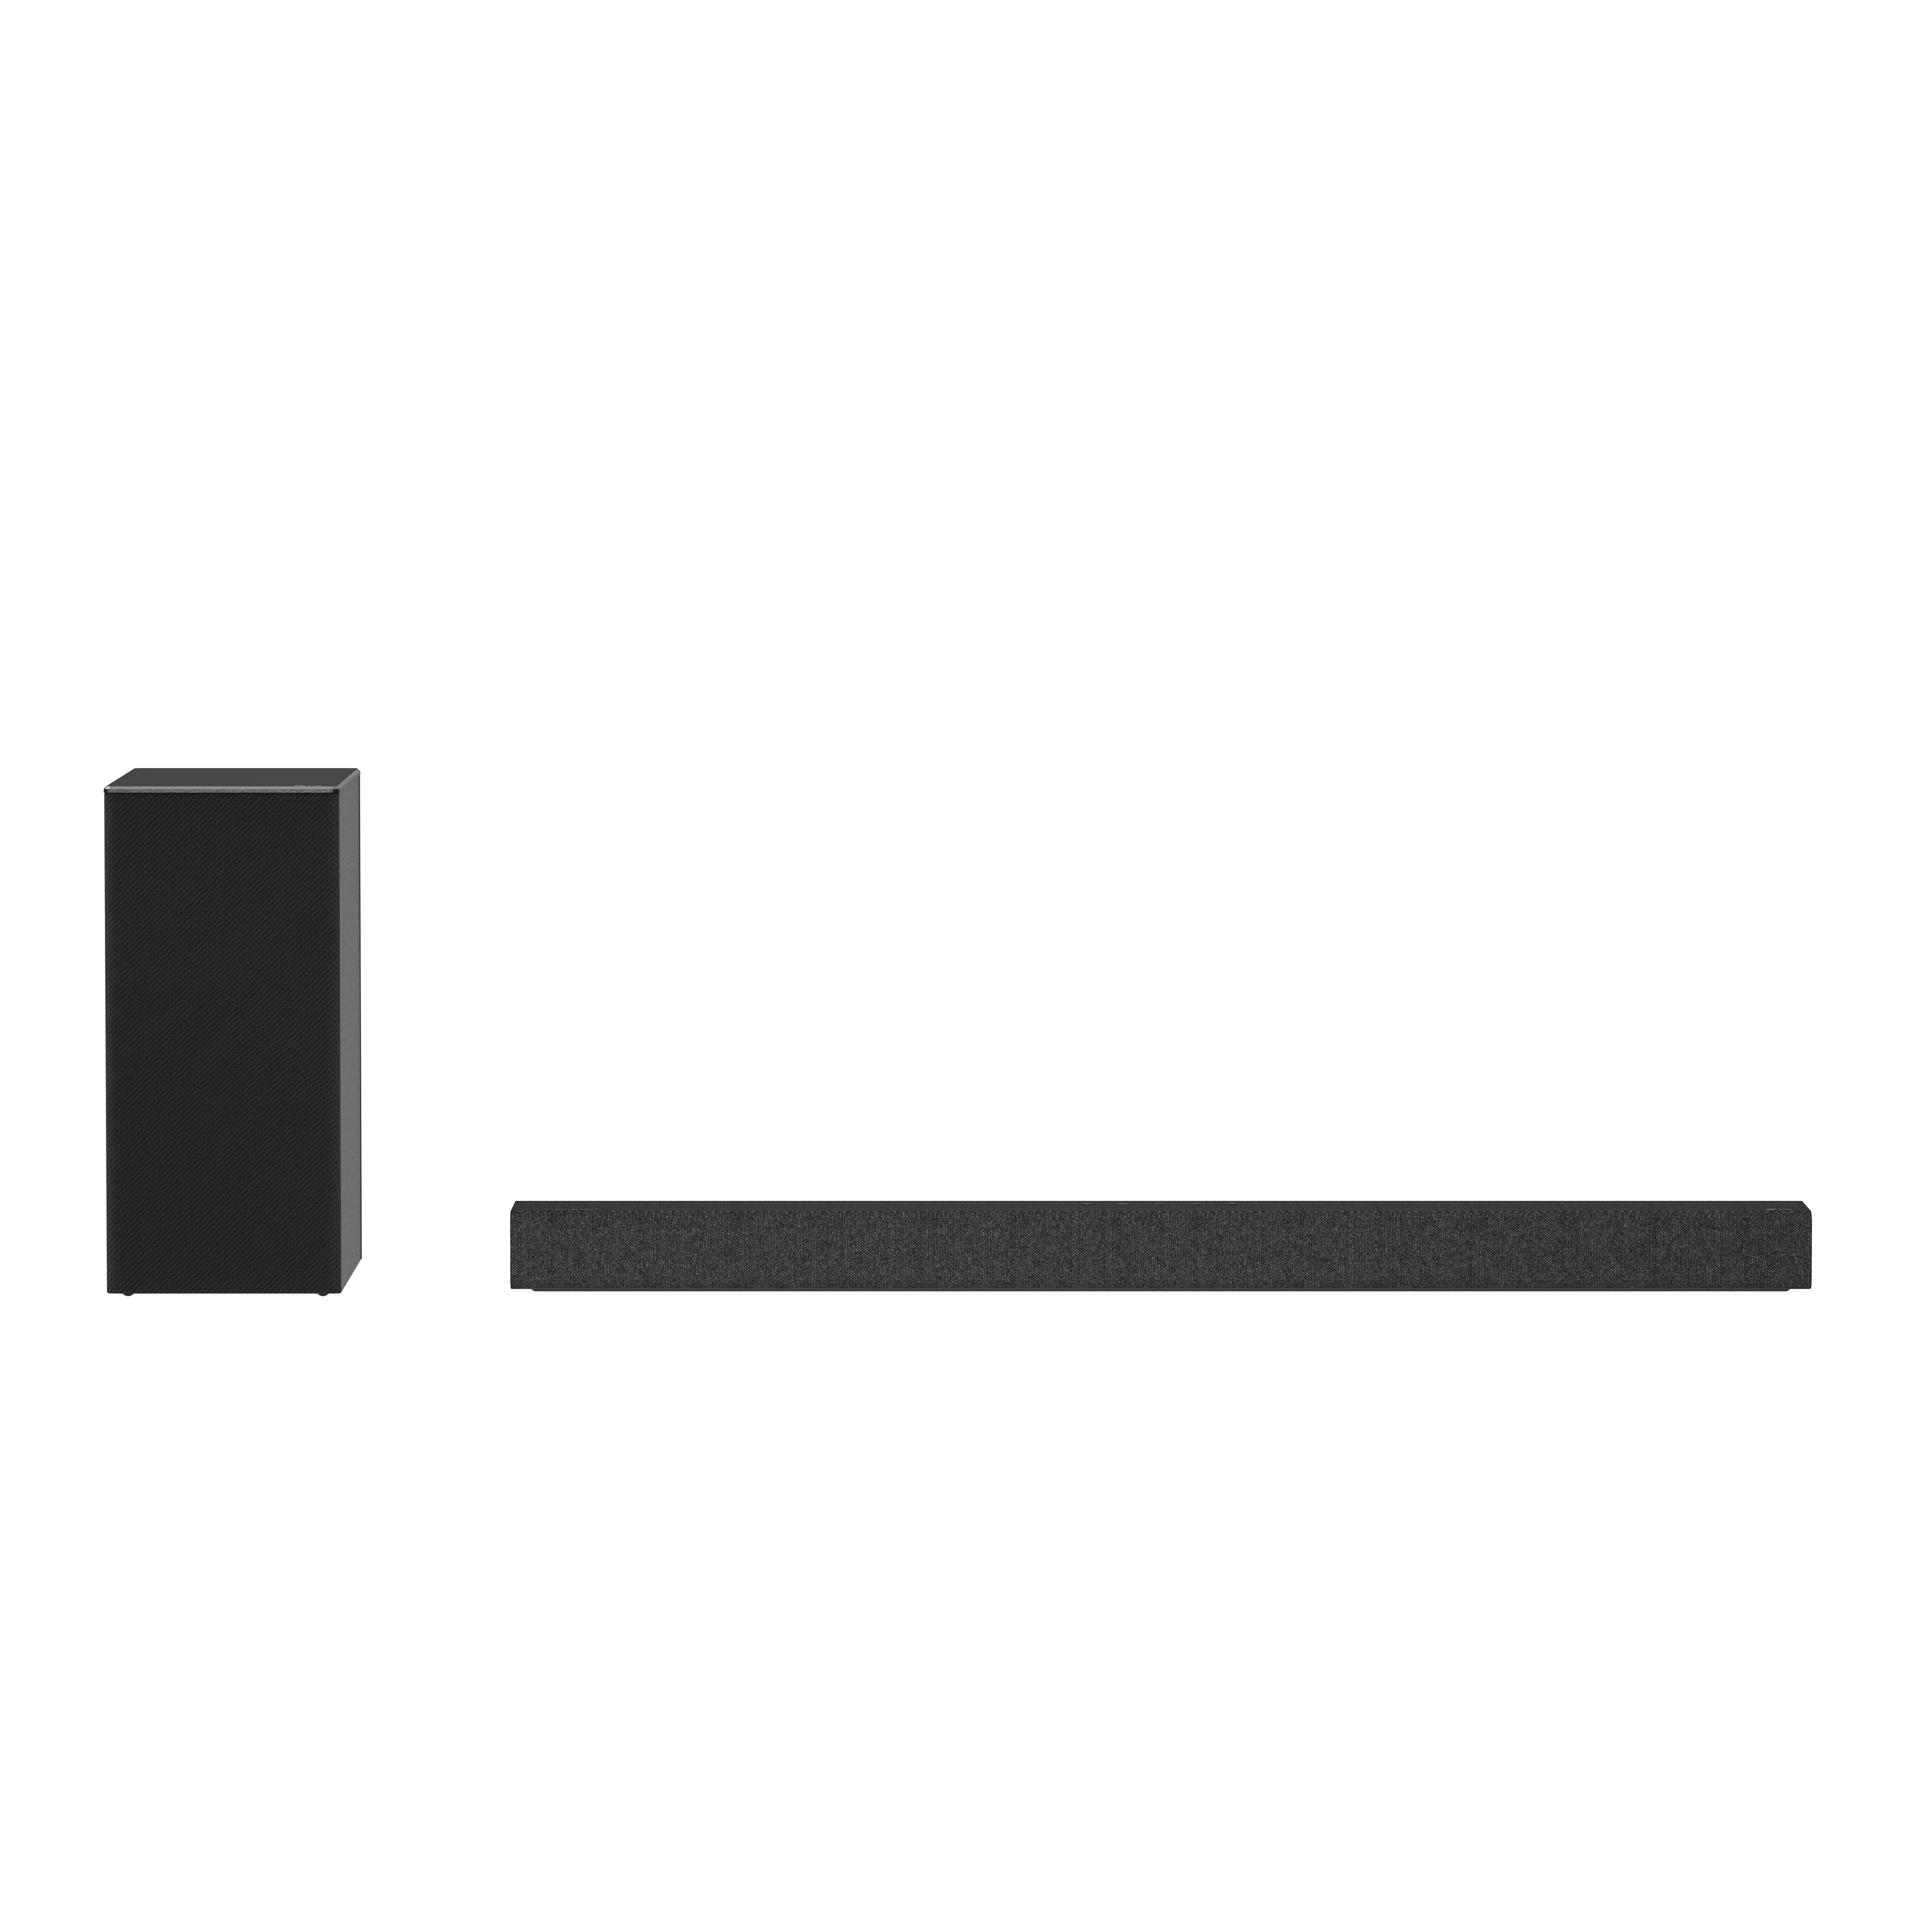 LG 5.1 Channel High-Res Audio Sound Bar with DTS Virtual:X - SP7Y